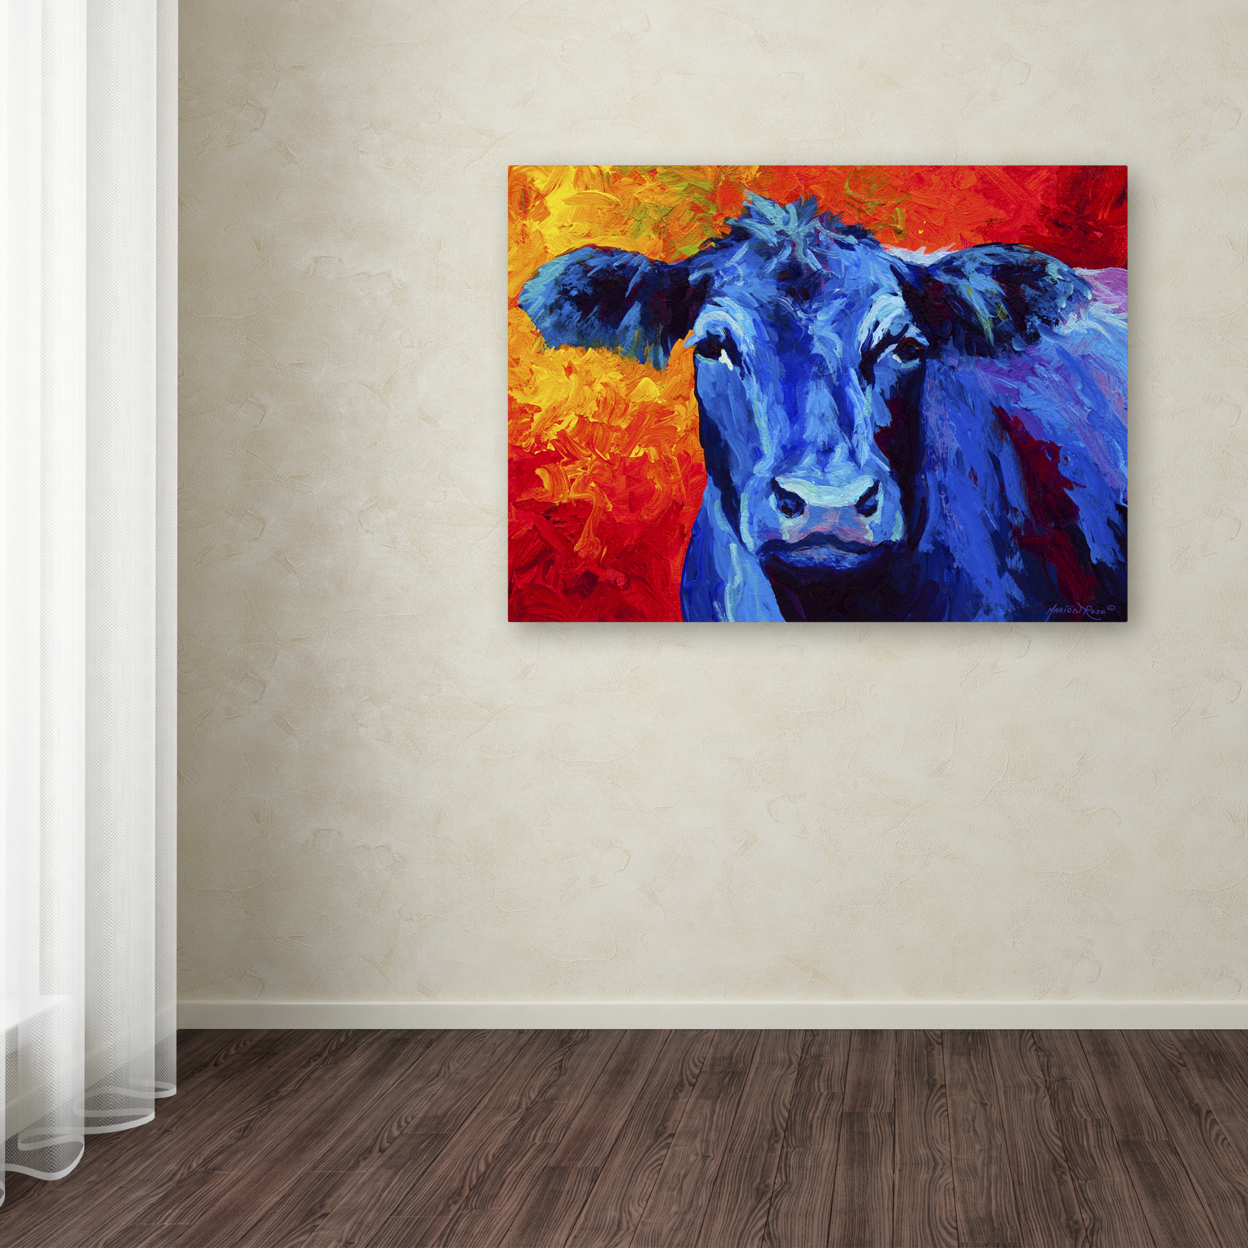 Marion Rose 'Blue Cow' Ready To Hang Canvas Art 24 X 32 Inches Made In USA